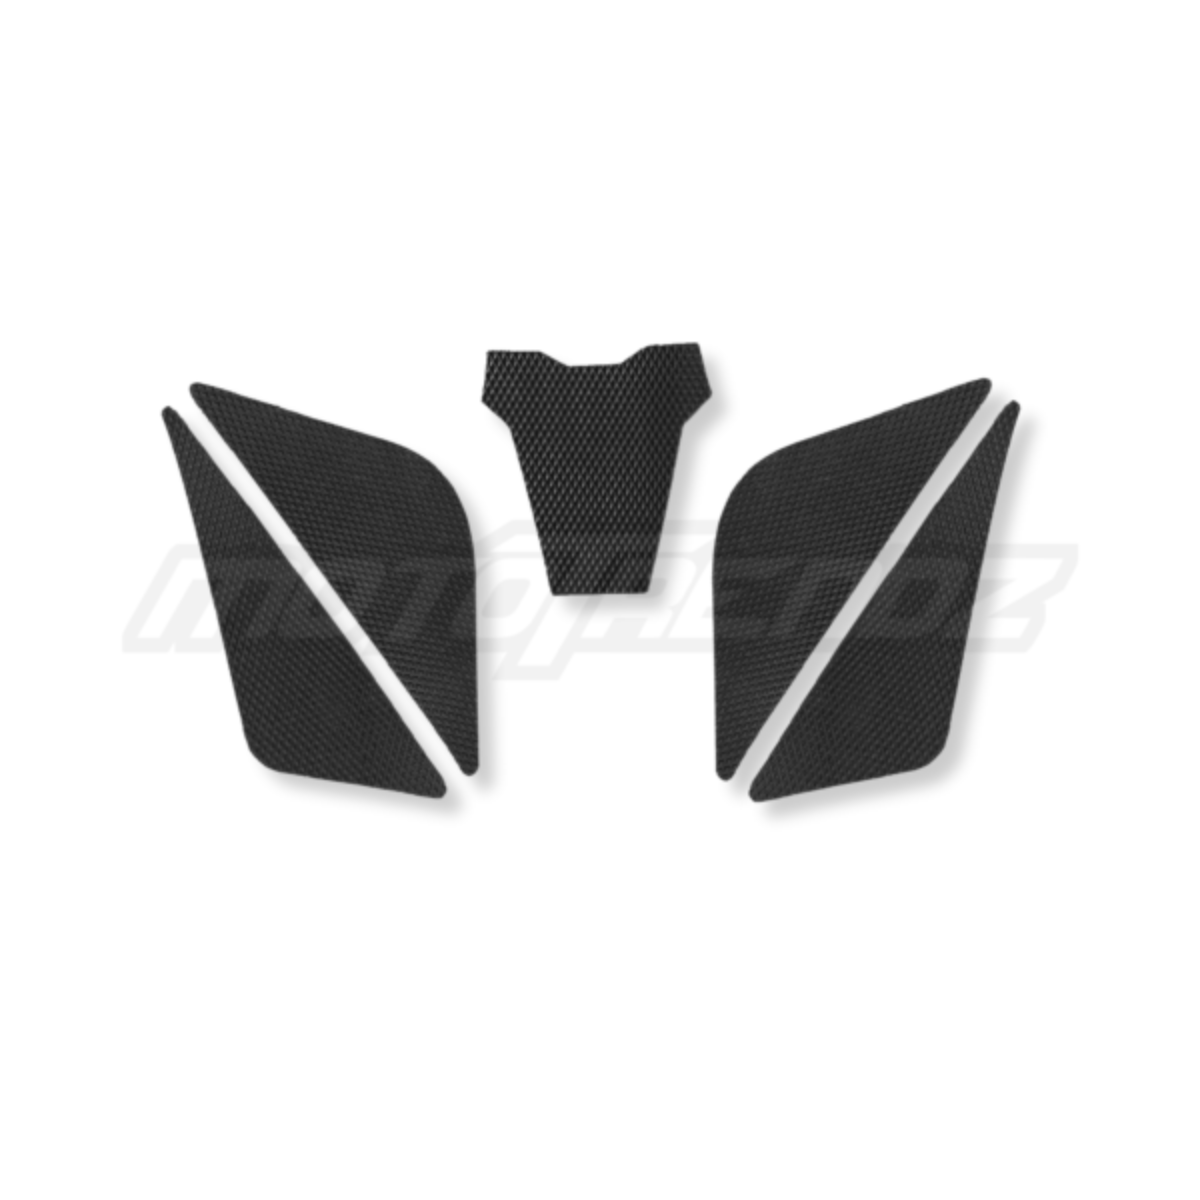 Traction Pads for KTM RC (Old Model) 125/200/390 4